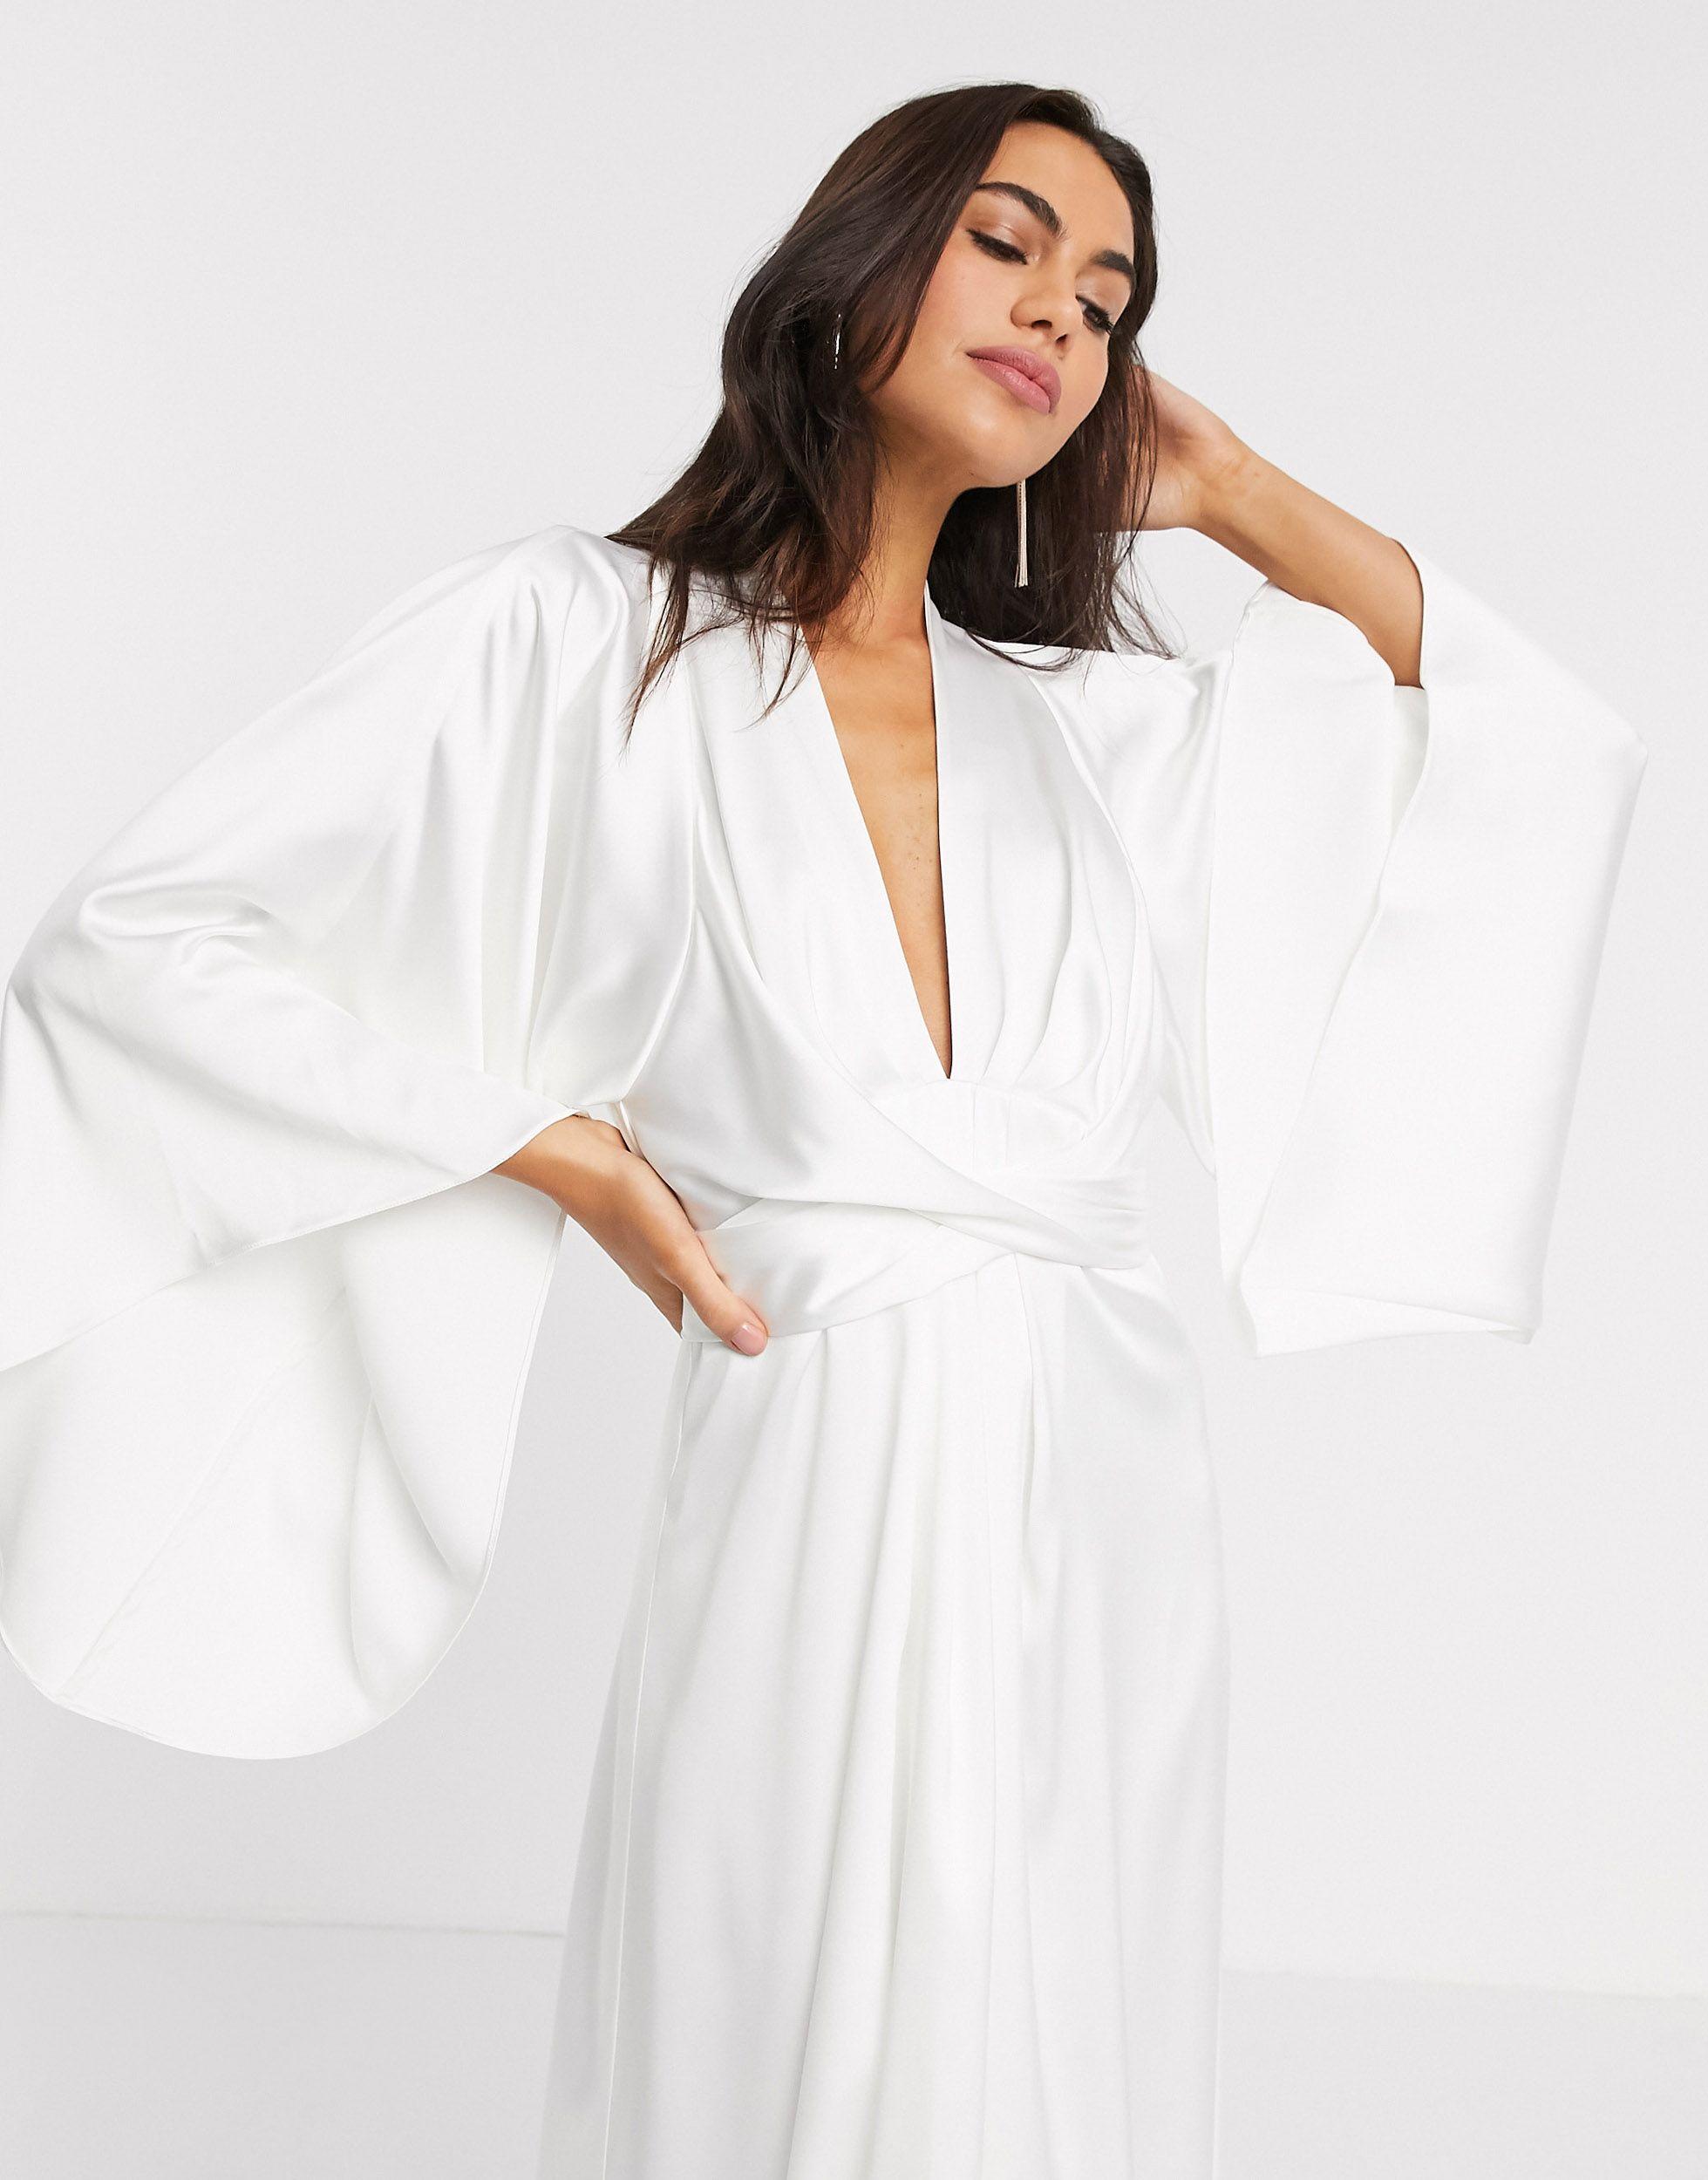 ASOS Extreme Cape Sleeve Maxi Wedding Dress in White | Lyst